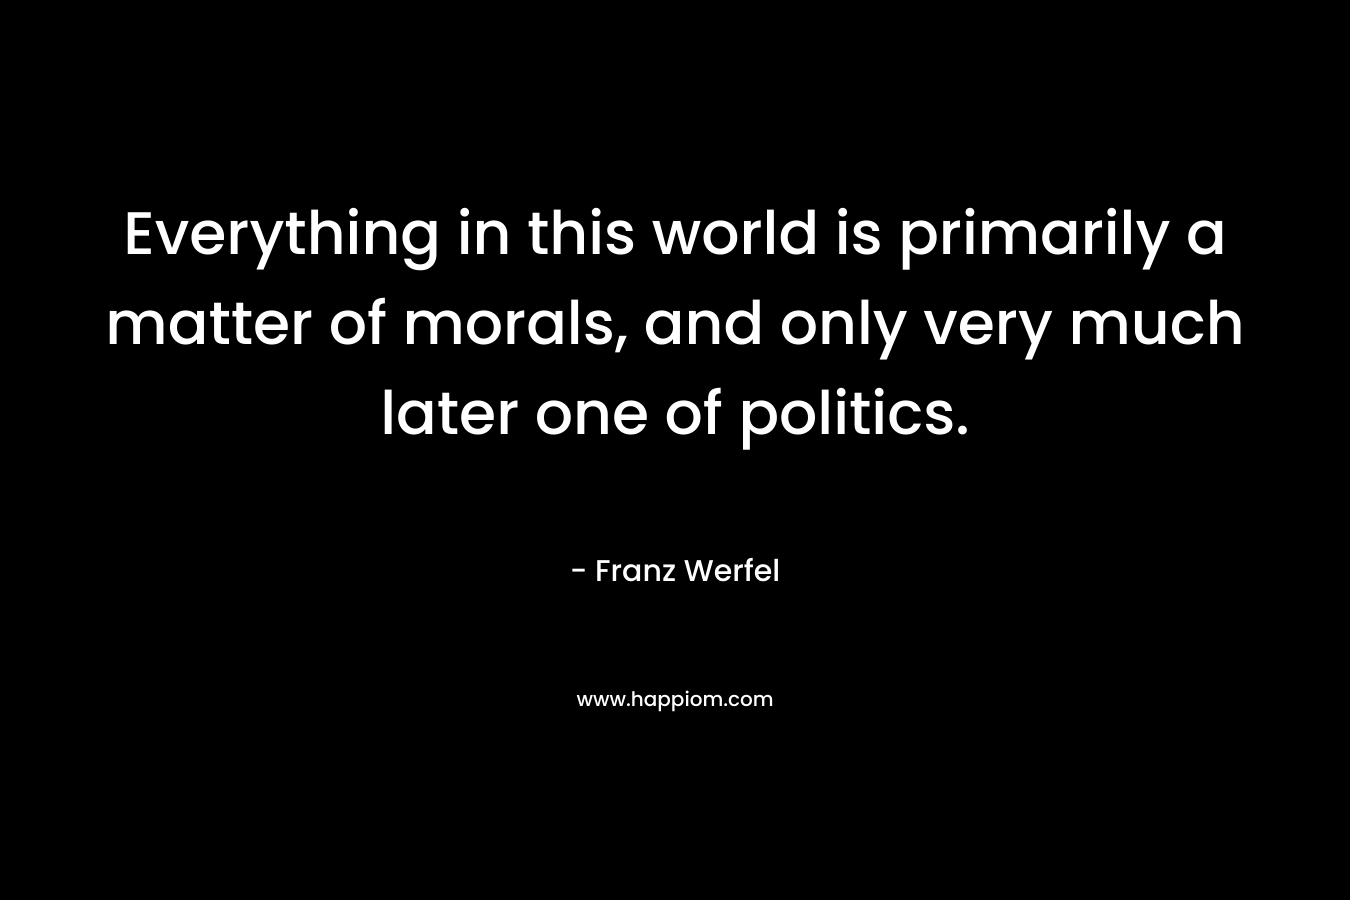 Everything in this world is primarily a matter of morals, and only very much later one of politics.